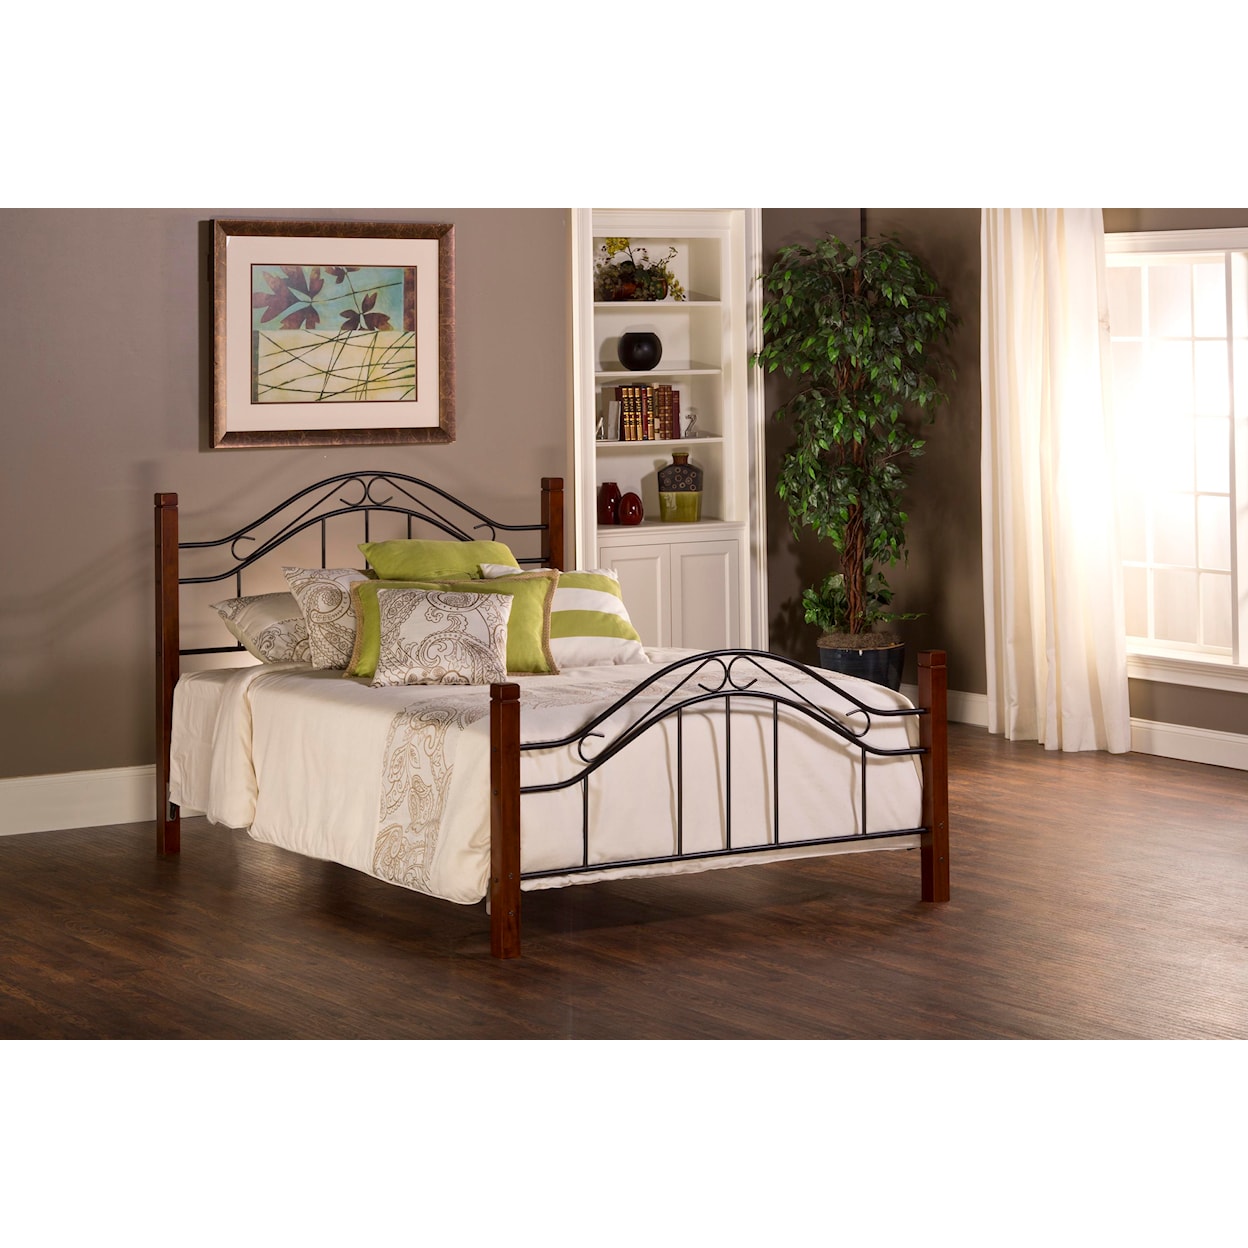 Hillsdale Metal Beds Matson Twin Bed Set Without Rails